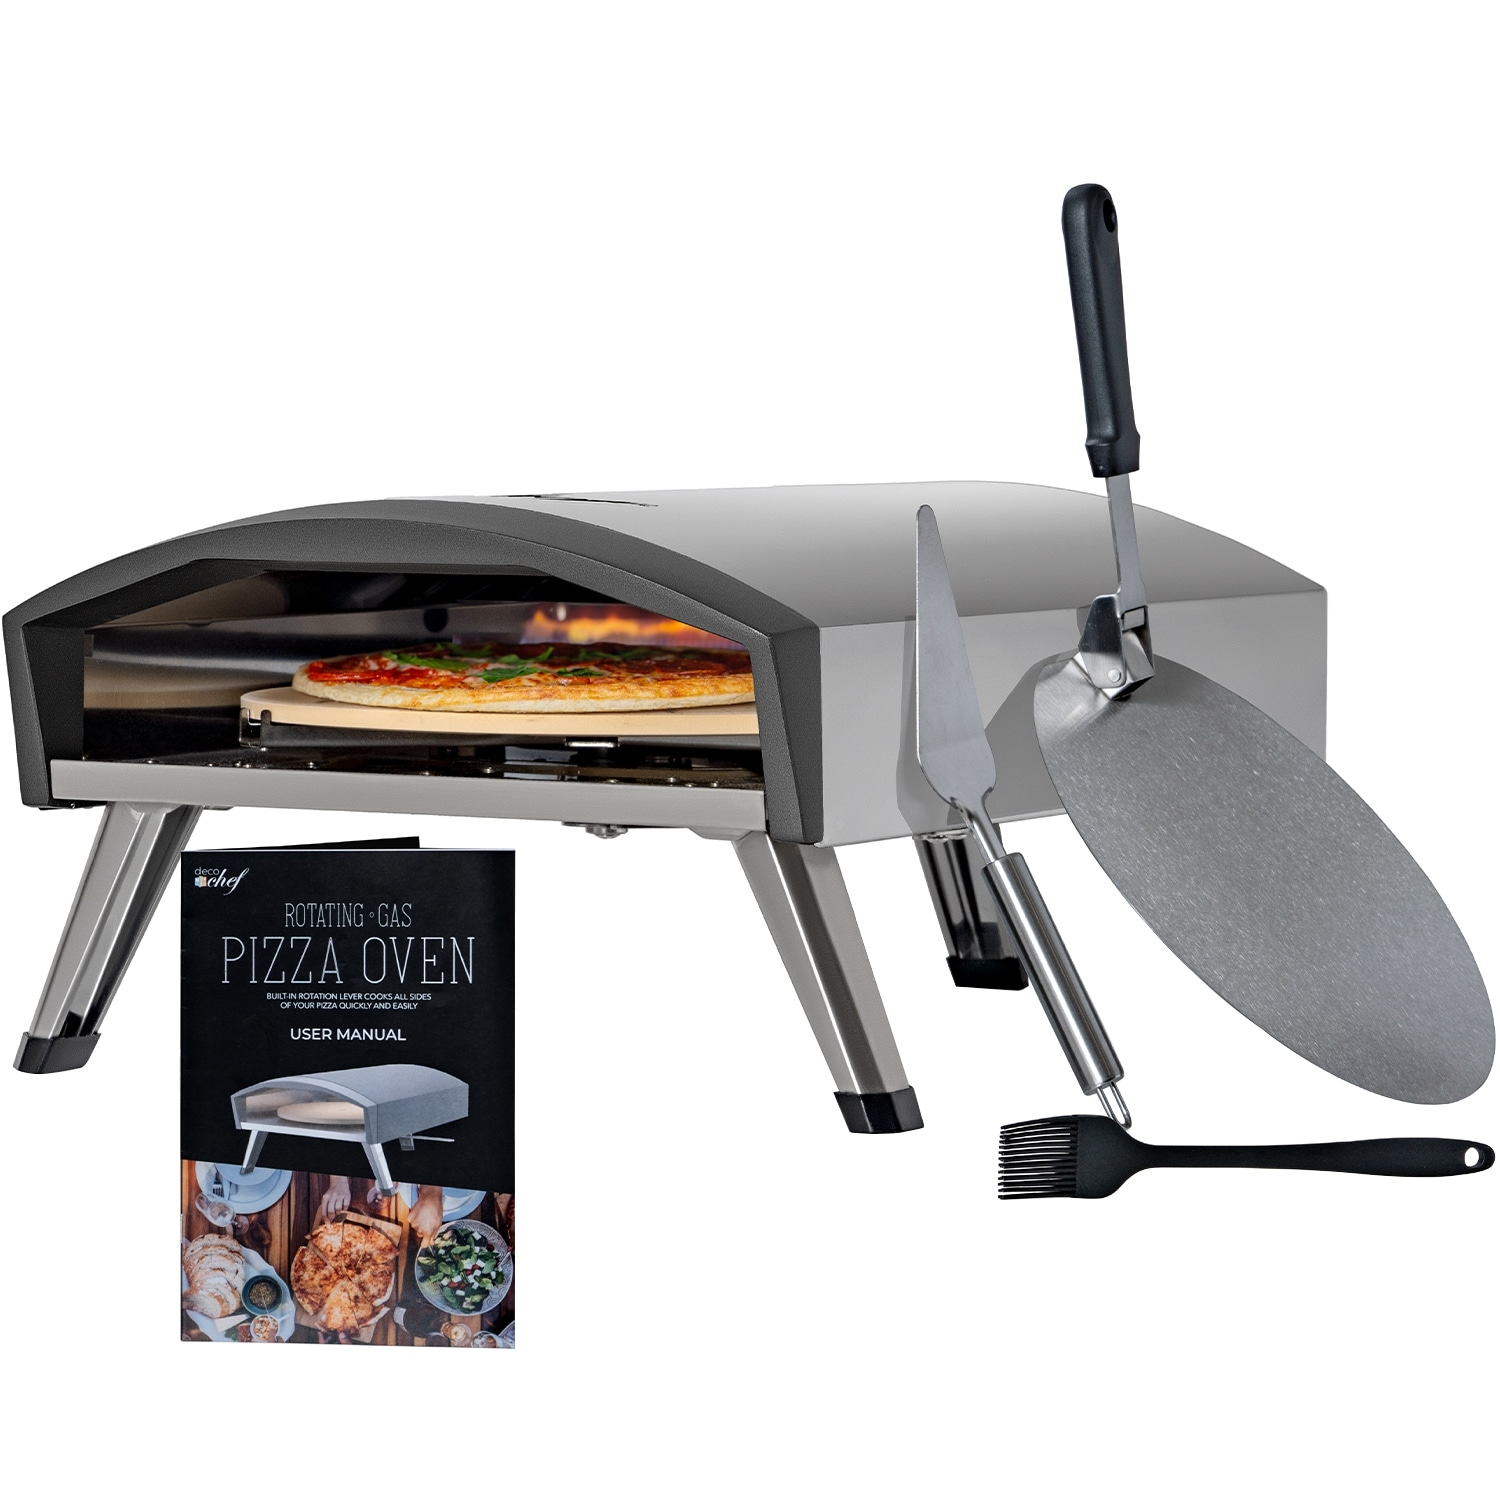 https://ak1.ostkcdn.com/images/products/is/images/direct/180c15de2f5c3d88c4dca2aa4f38fea1ef80e1aa/Deco-Chef-Outdoor-Gas-Portable-Pizza-Oven-%2B-Self-Rotating-Baking-Stone.jpg